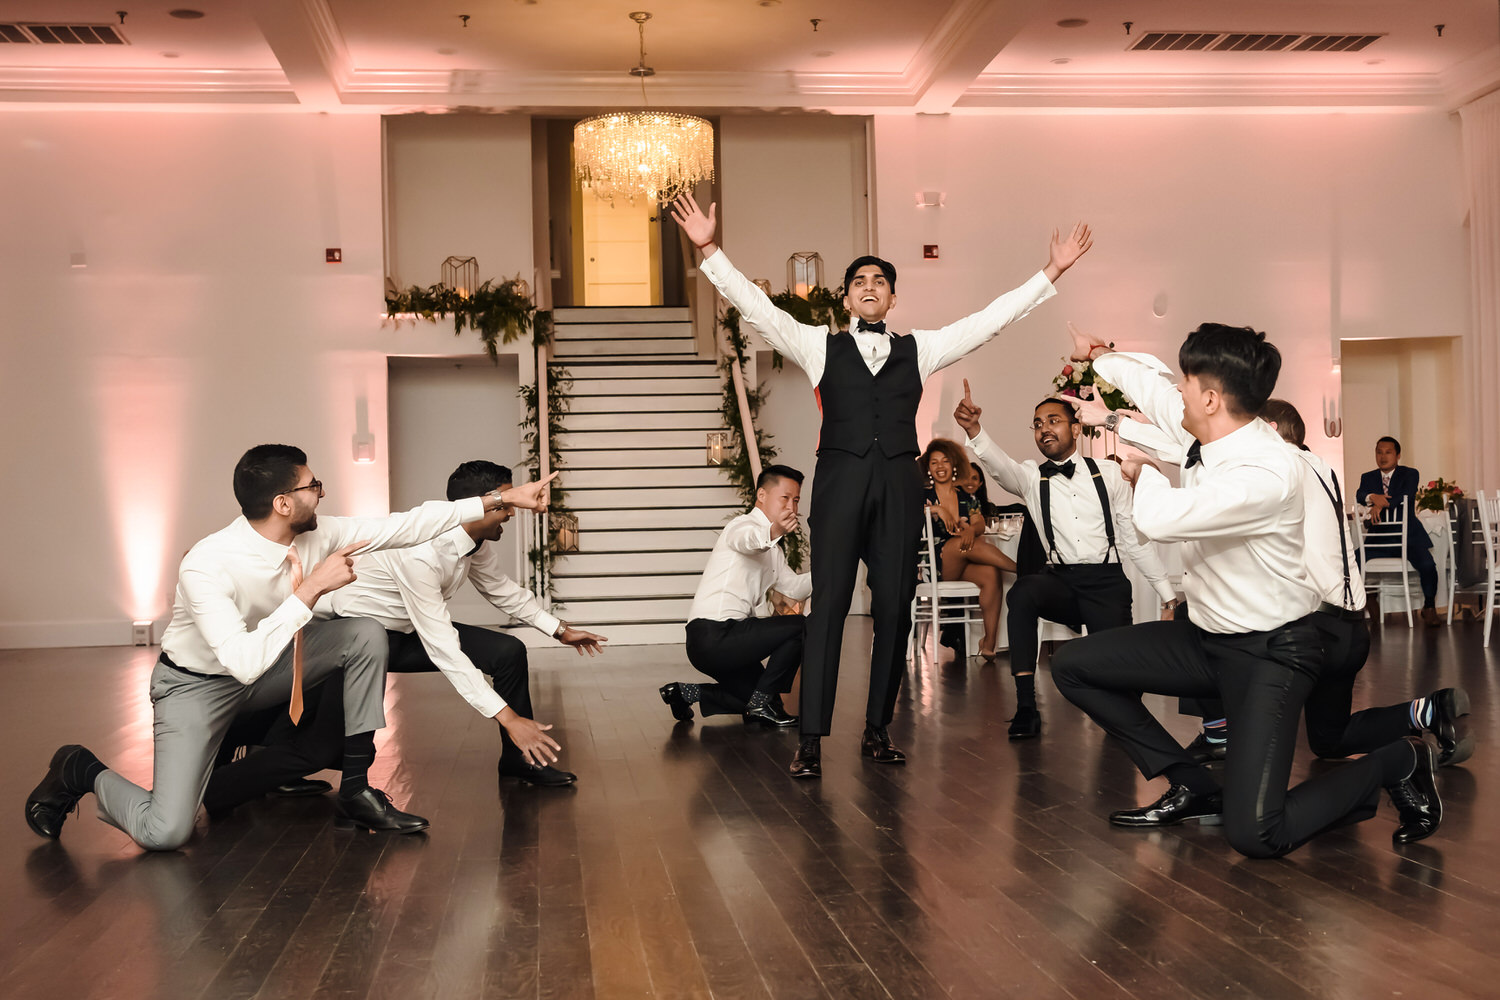 A man in a tuxedo dancing with a group of men in white shirts.